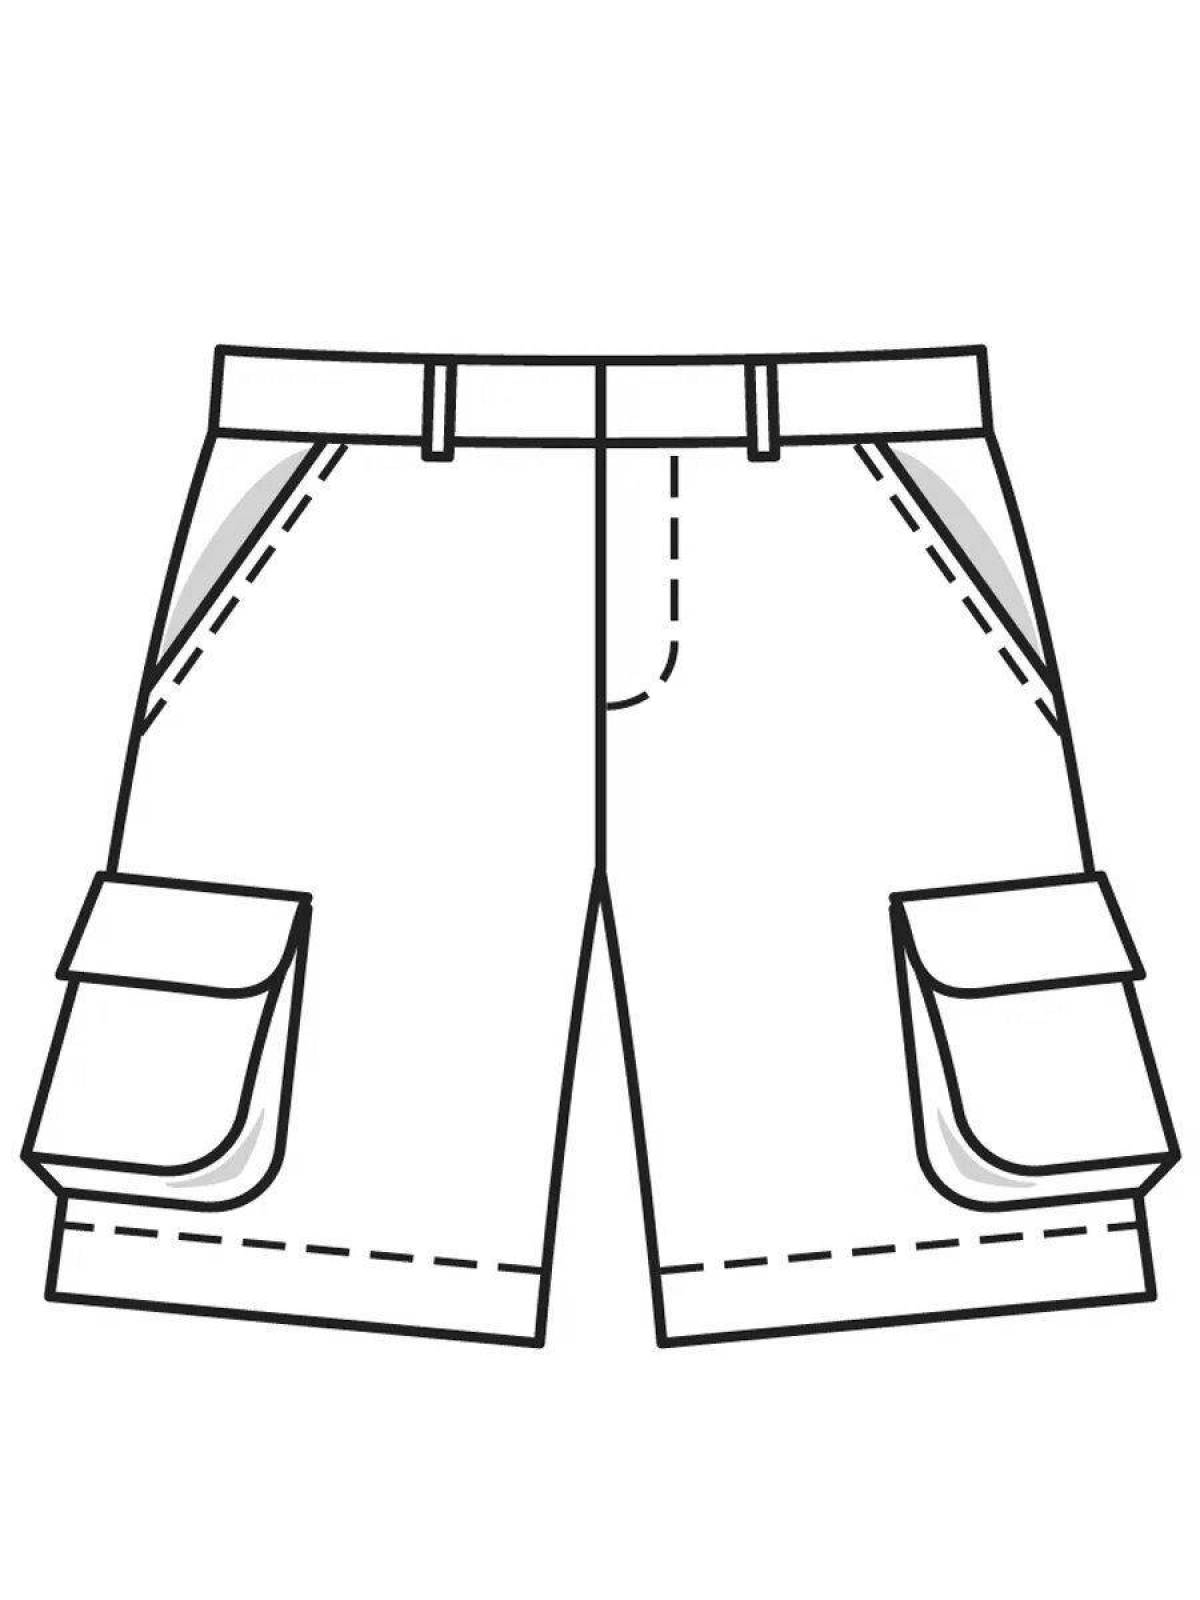 Fun coloring shorts for the little ones